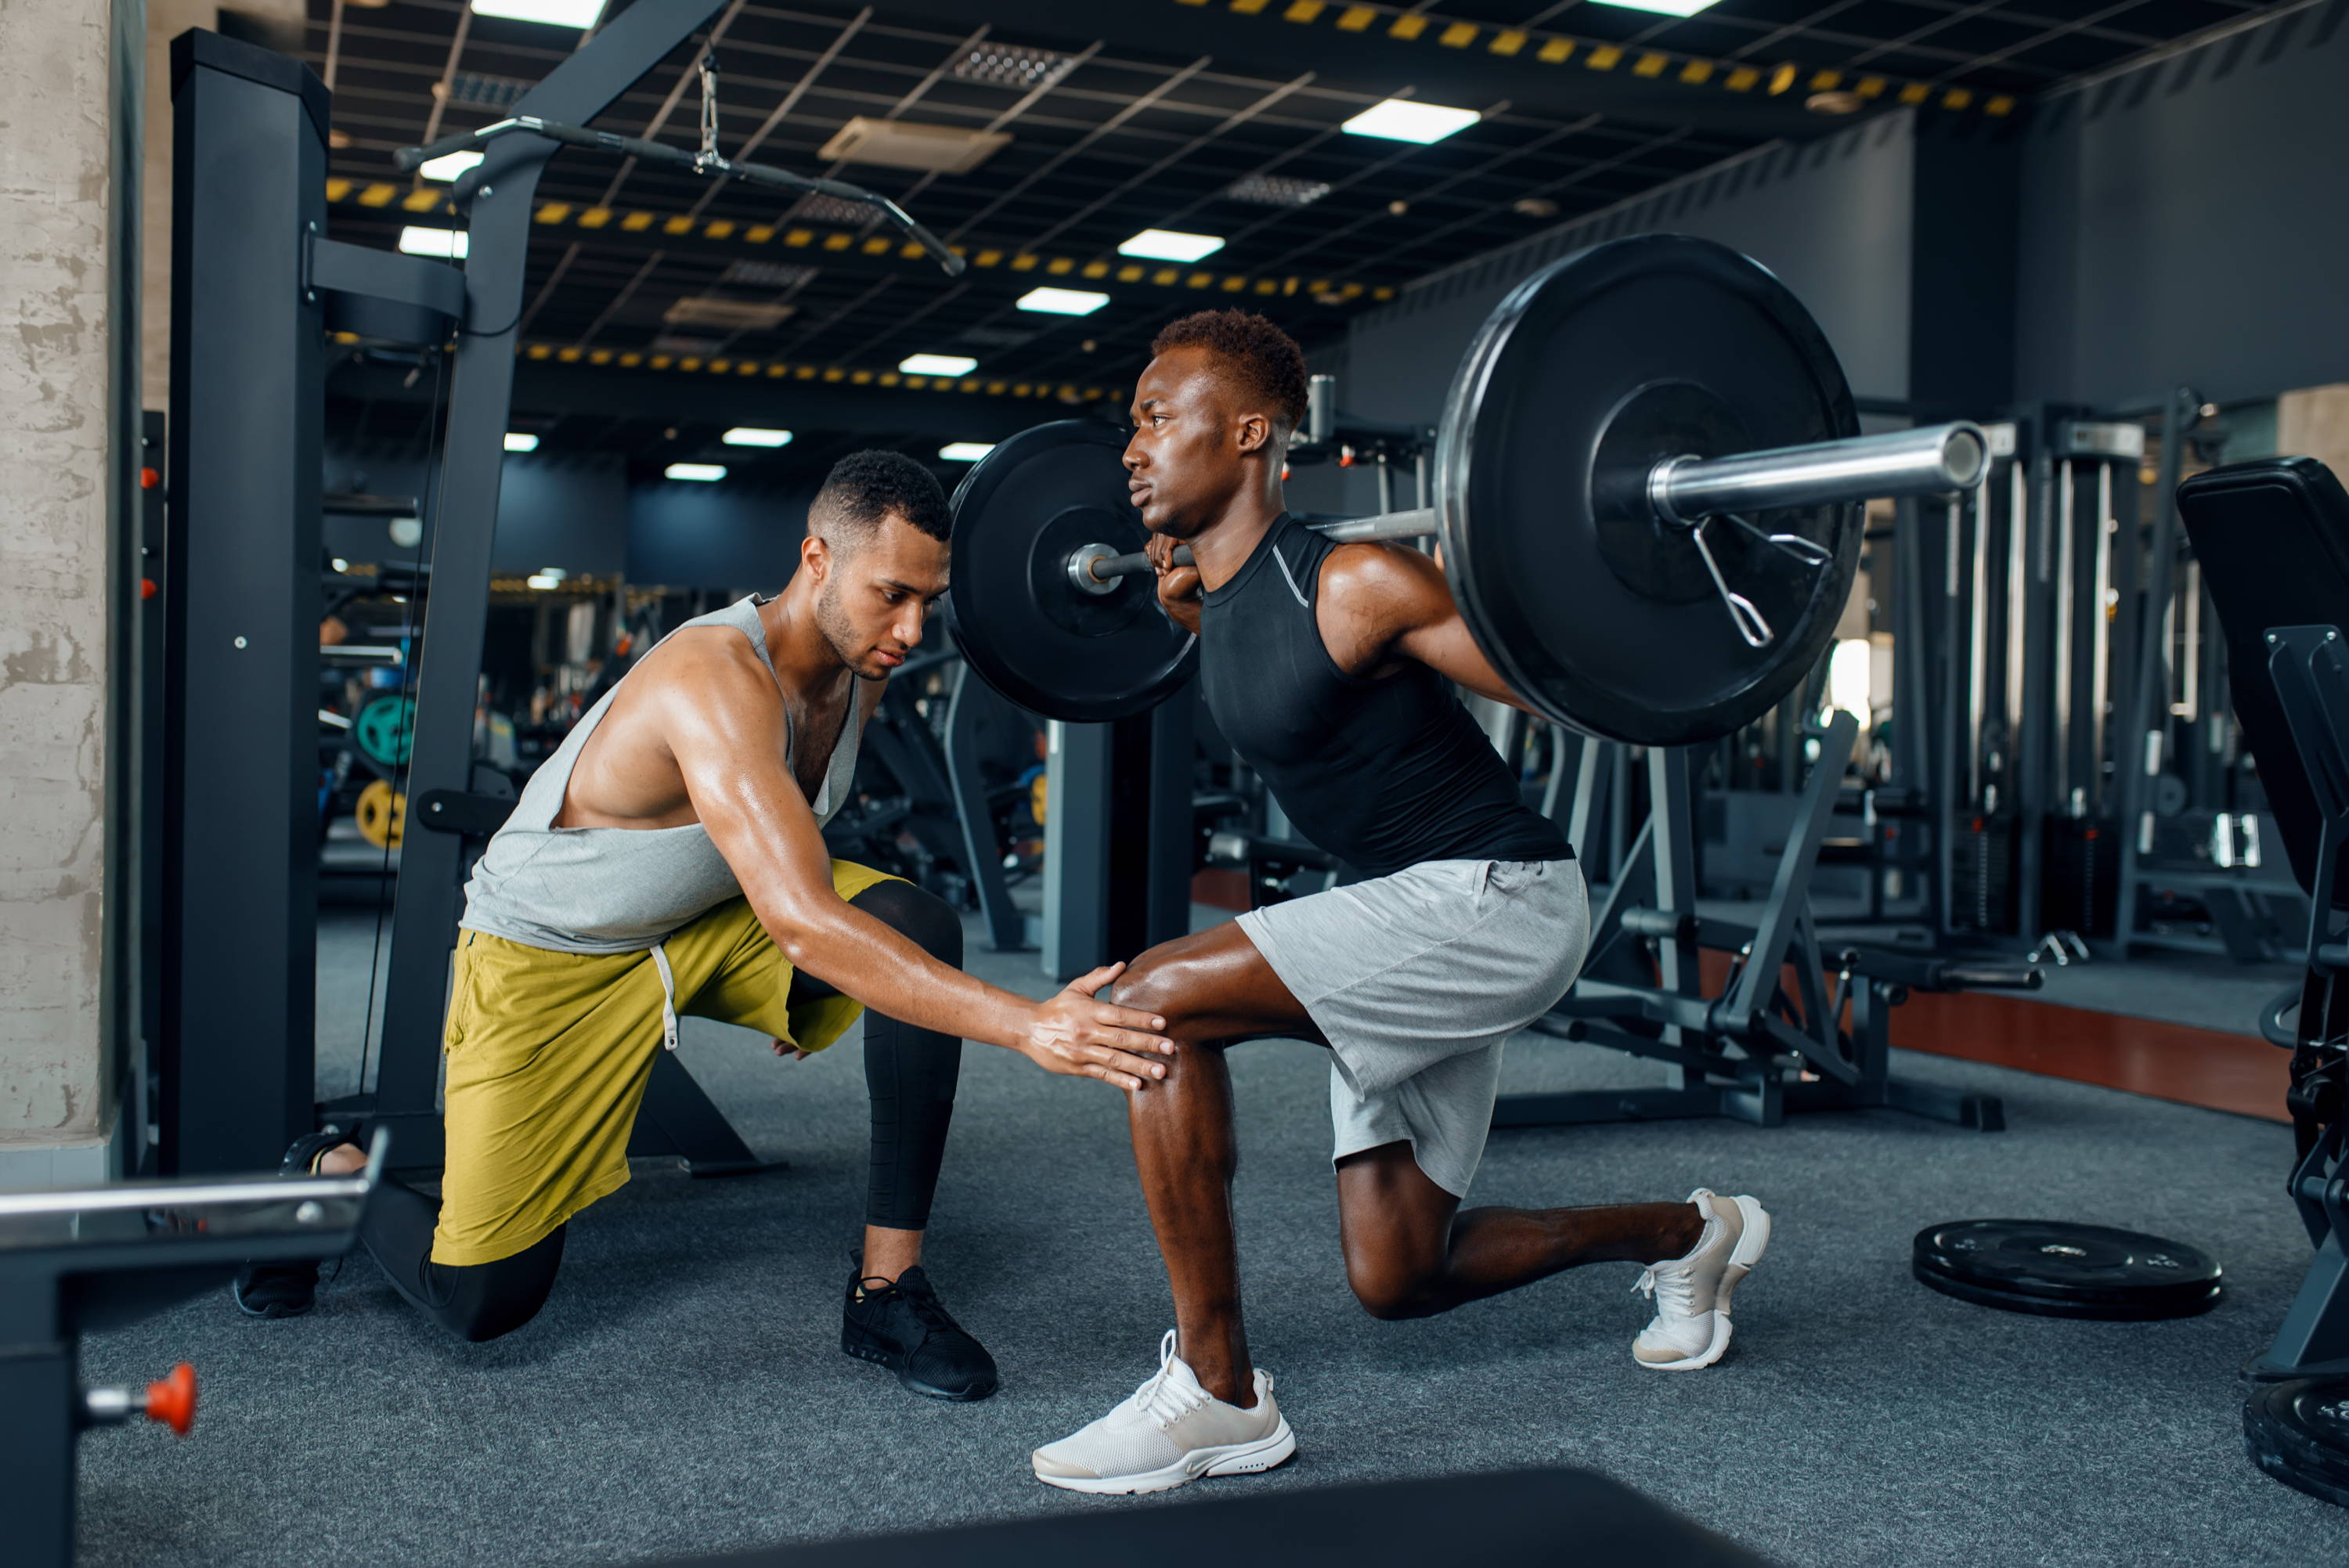 Man lifting weights. Man exercising with personal trainer